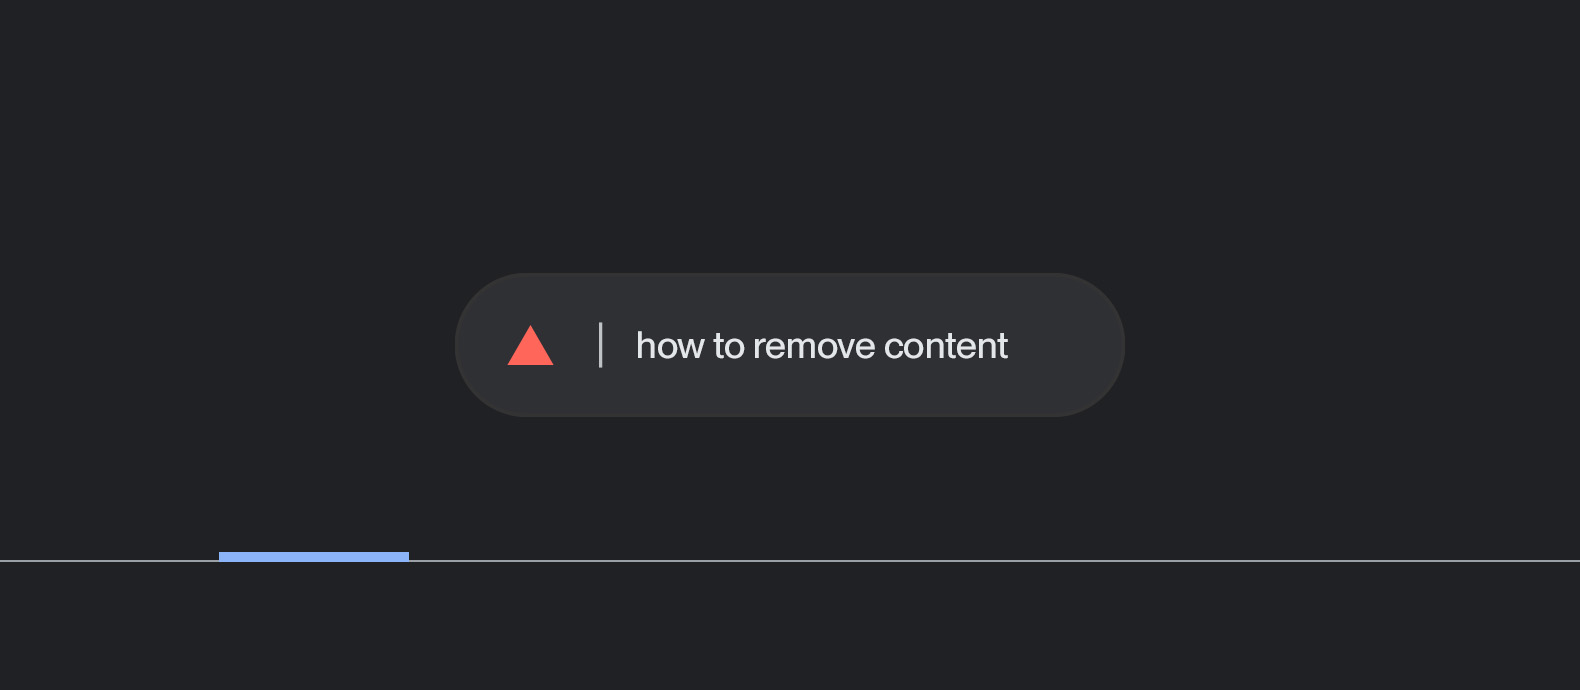 6 steps to remove content from Google